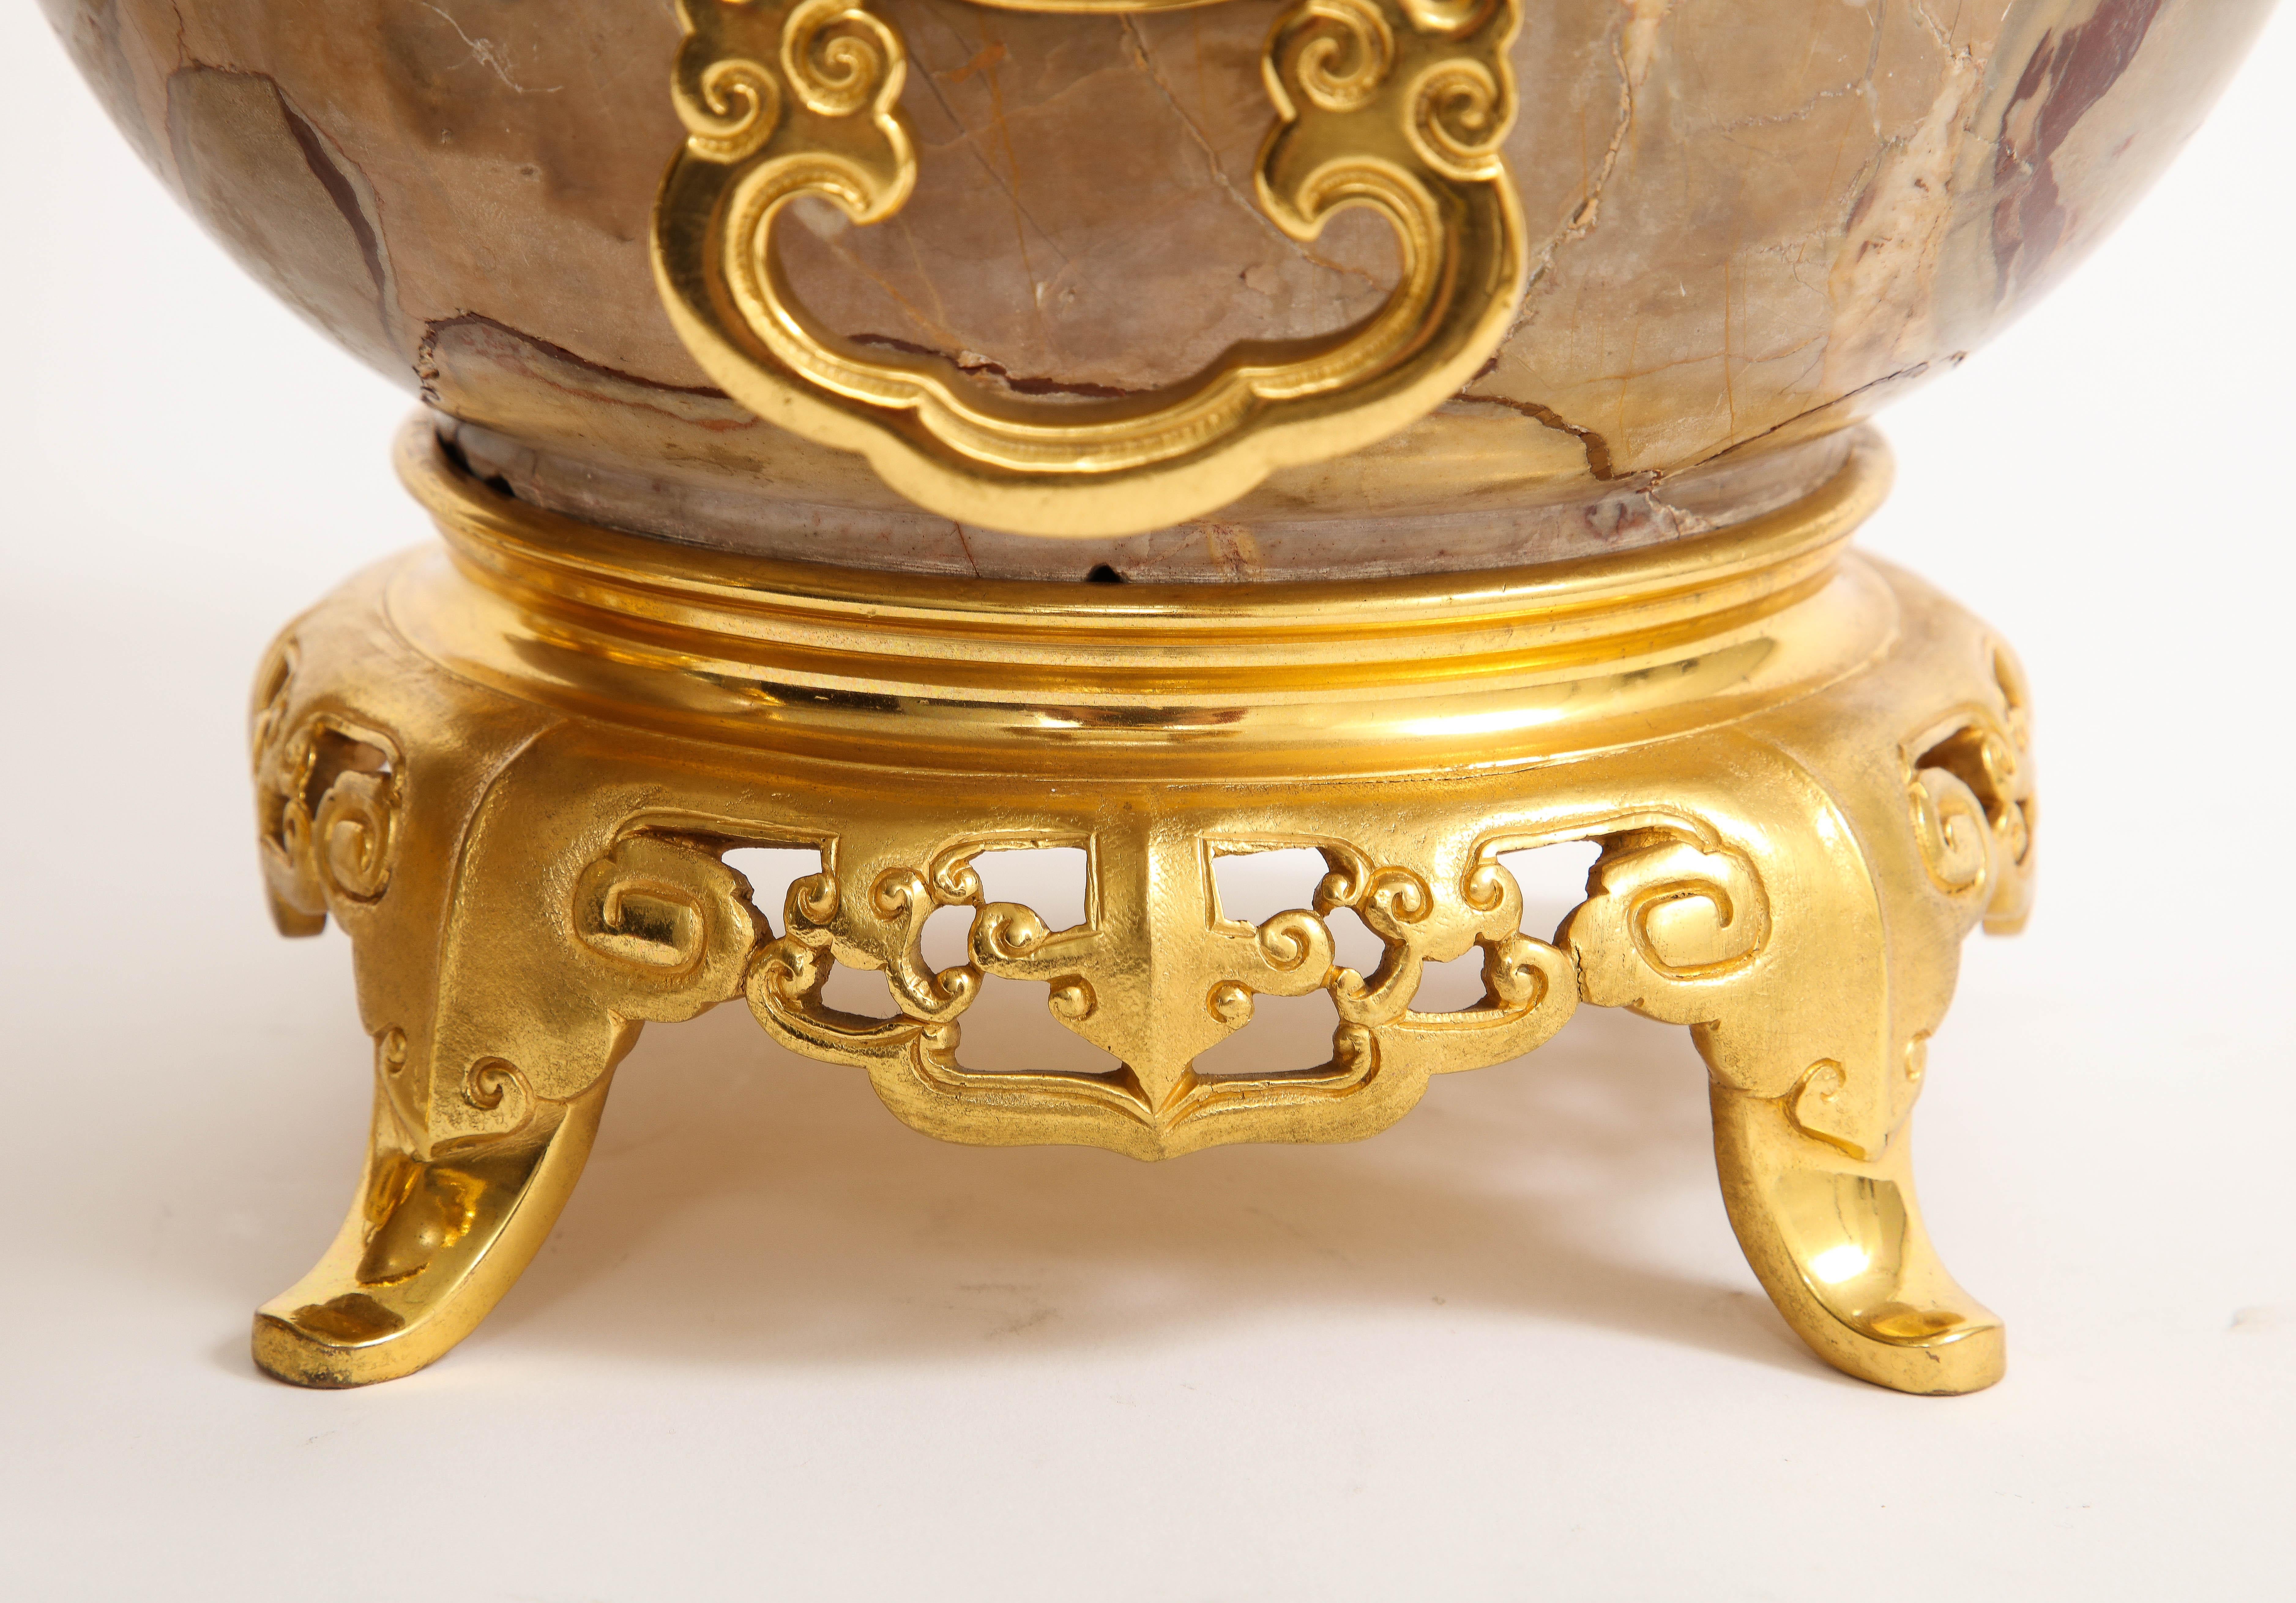 Pair of 19th Century French Ormolu Mounted Marble Centerpieces, H. Journet & Cie For Sale 3